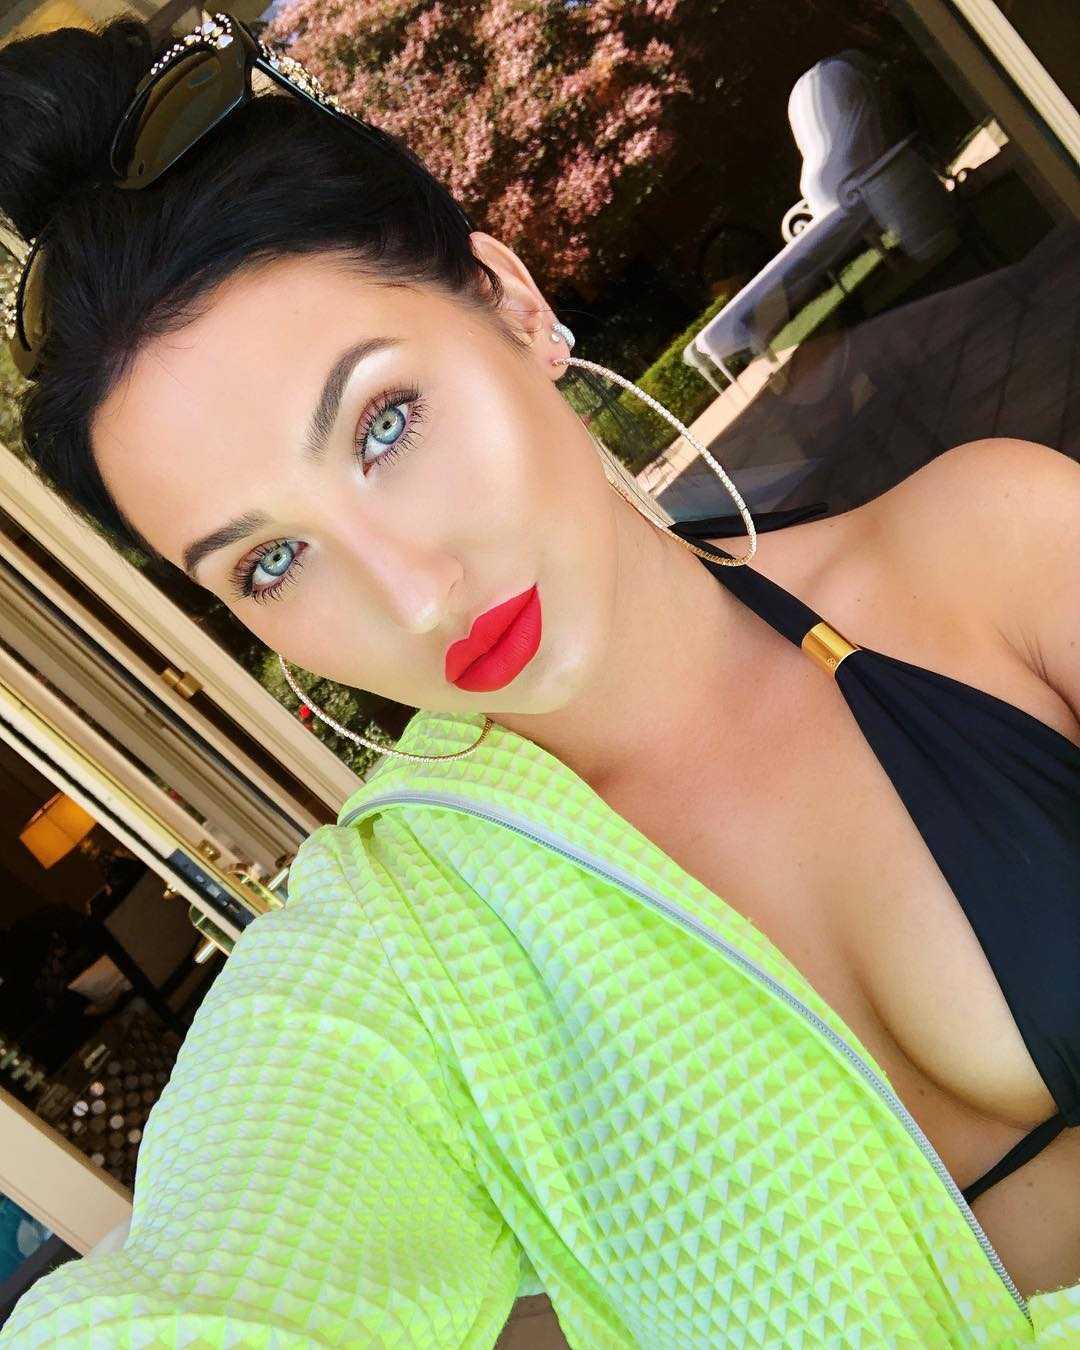 51 Sexy Jaclyn Hill Boobs Pictures Will Induce Passionate Feelings for Her 15